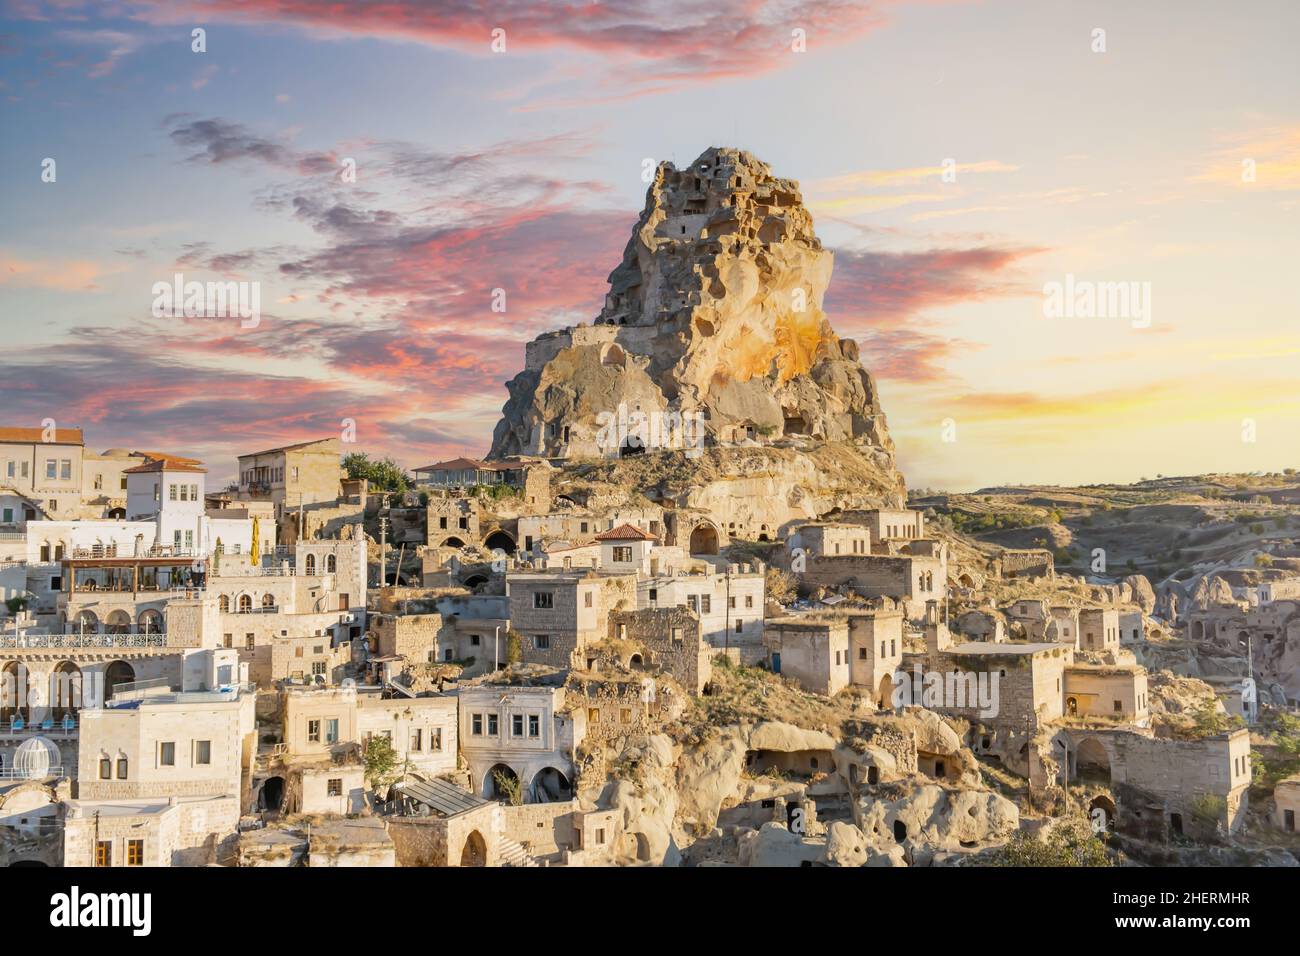 Ortahisar castle or central castle and fairy chimneys in Cappadocia, Turkey. Ortahisar Castle and traditional houses carved stone. Cave houses. Stock Photo